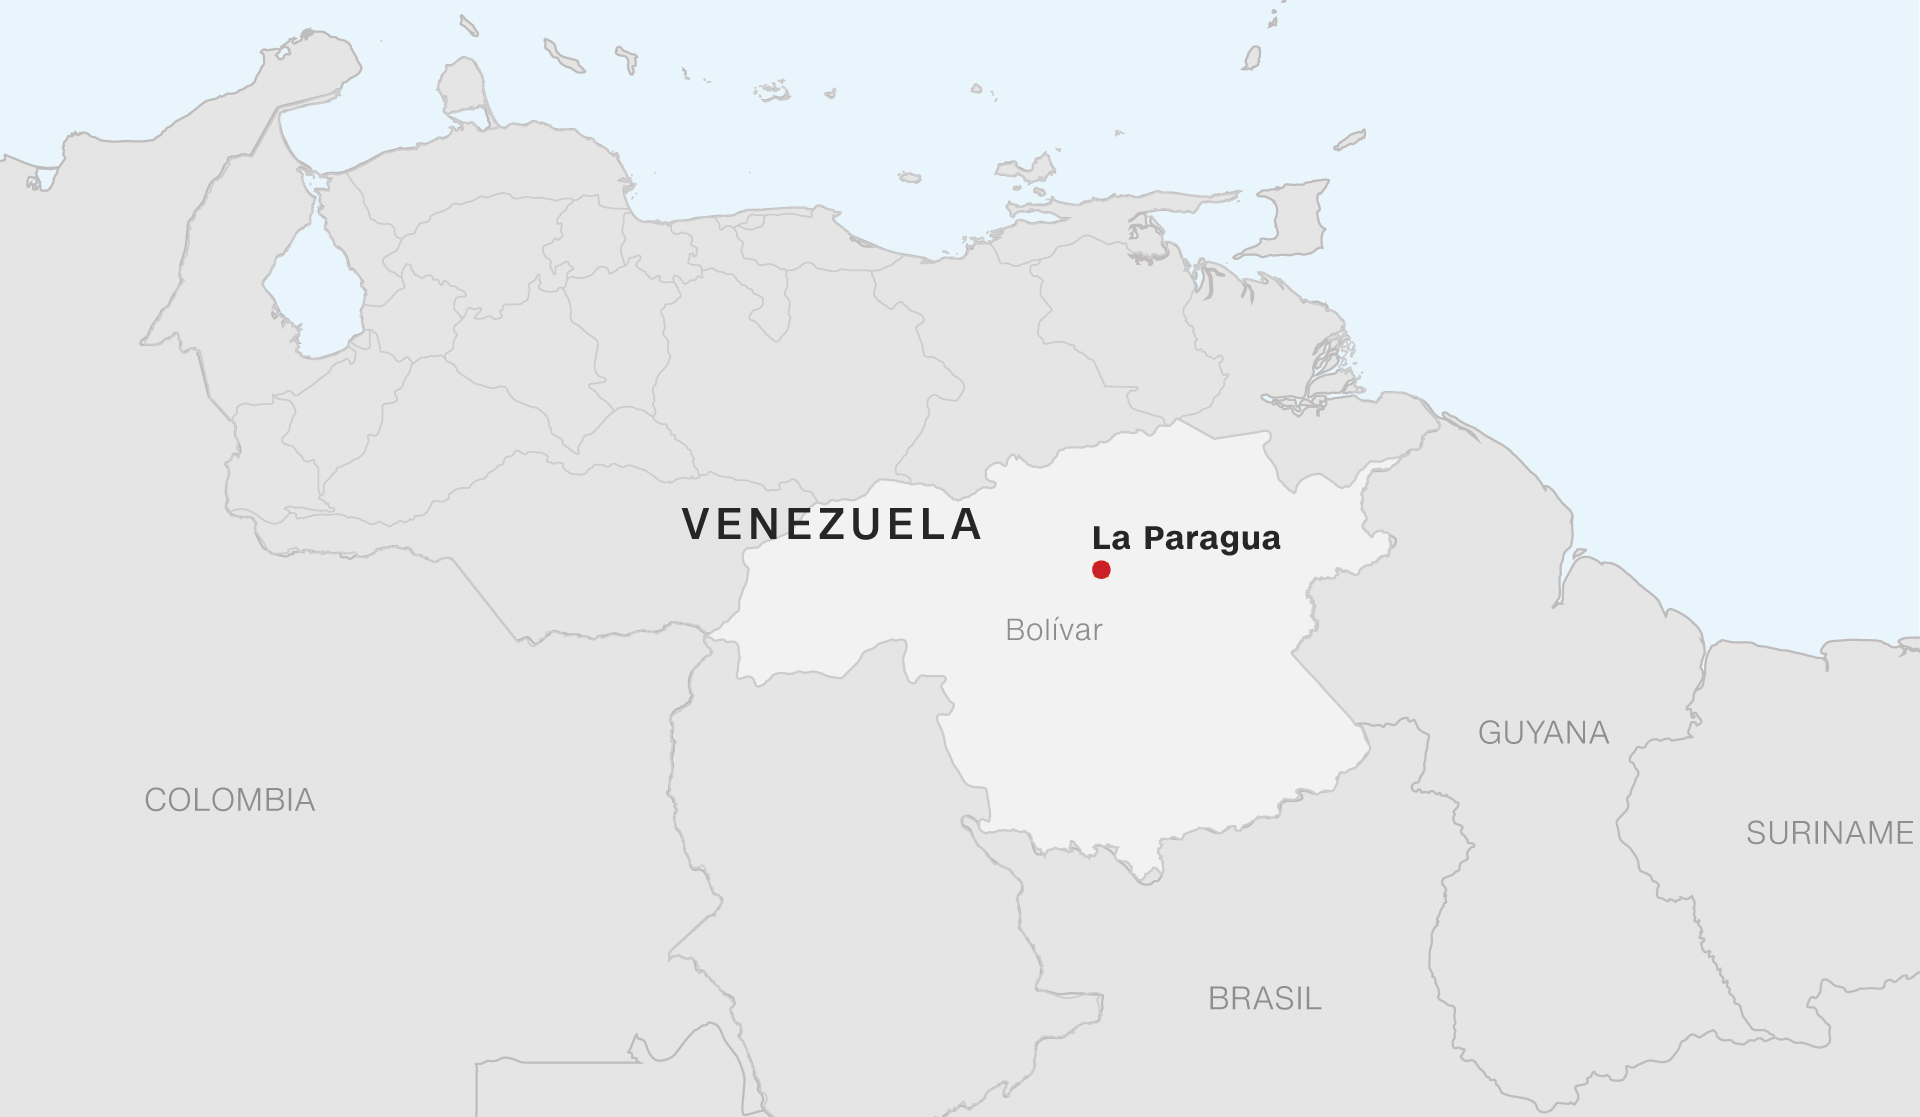 Many people died in gold mine collapse in Venezuela